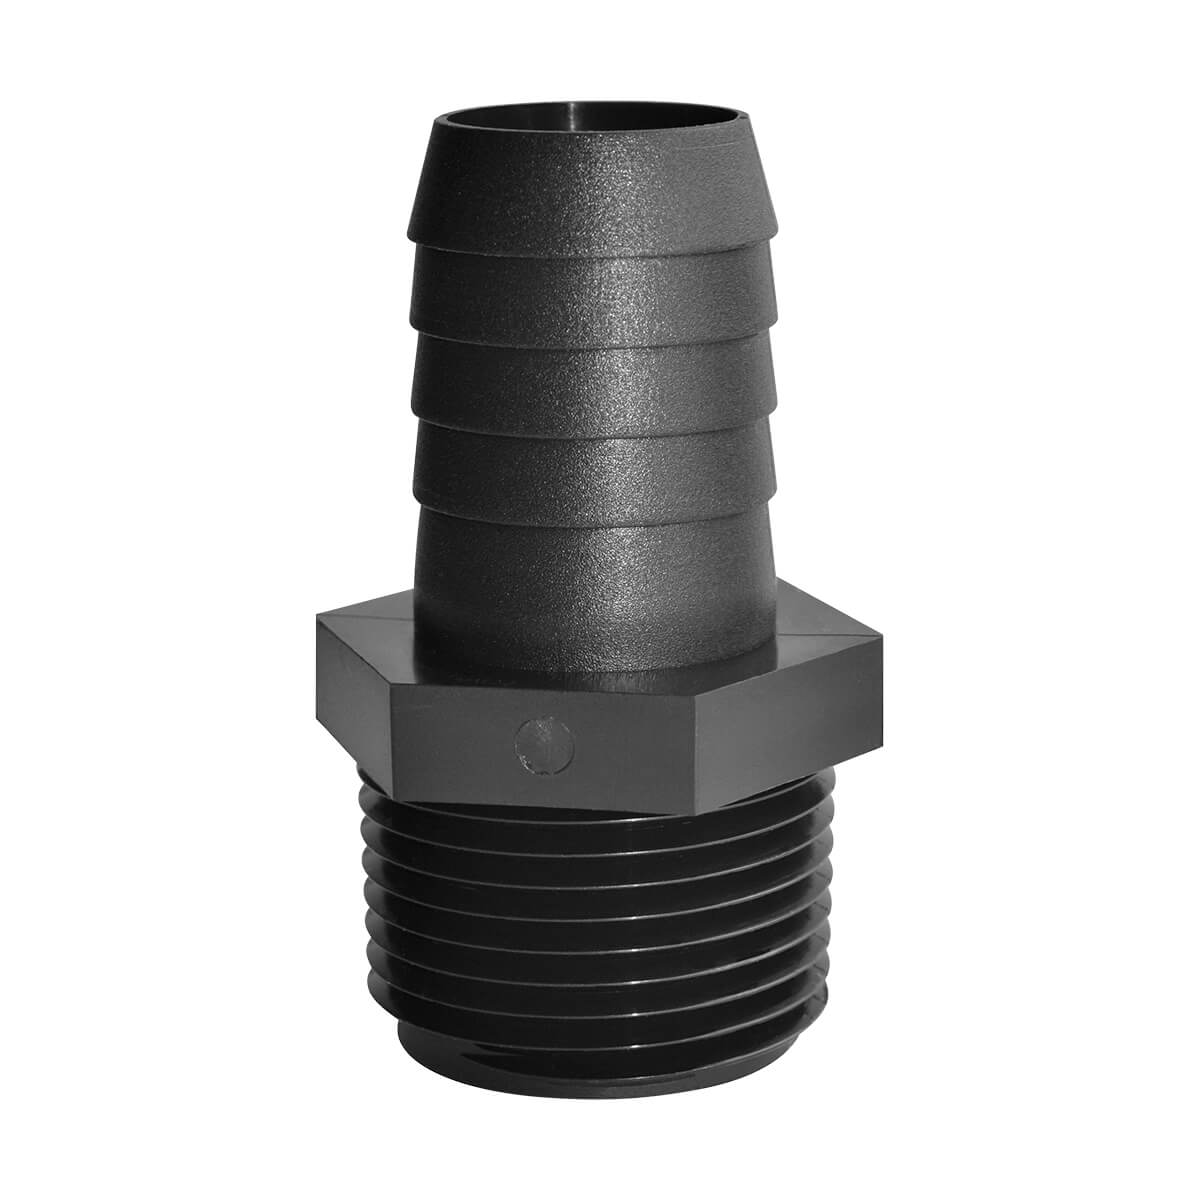 Adapter 1/2-in Male NPT x 3/4-in Hose Barb